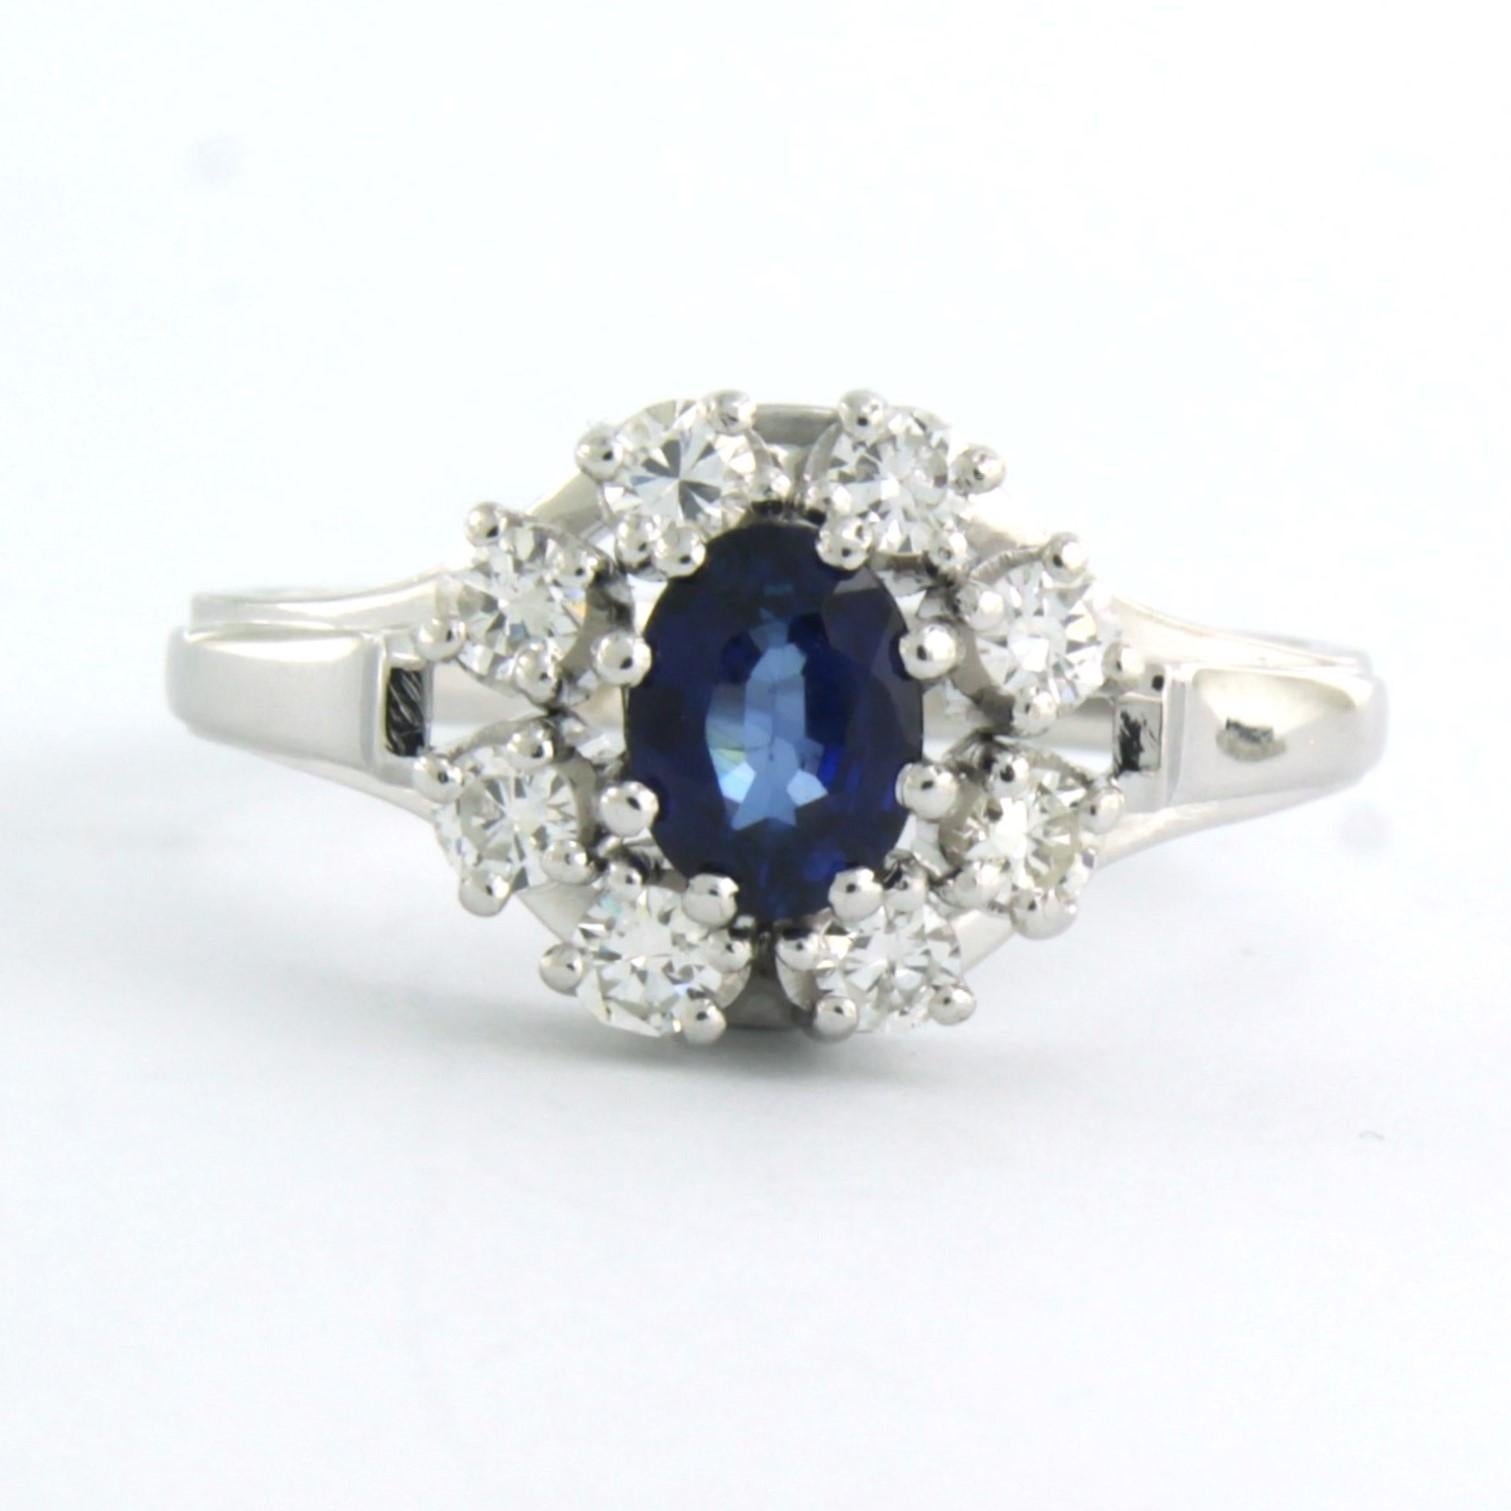 14k white gold entourage ring set with a sapphire in the center. 0.84ct and around it brilliant cut diamonds up to. 0.50ct - F/G - VS/SI - ring size U.S. 8.75 - EU. 18.75(59)

detailed description:

the top of the ring is 1.1 cm wide and 6.5 mm